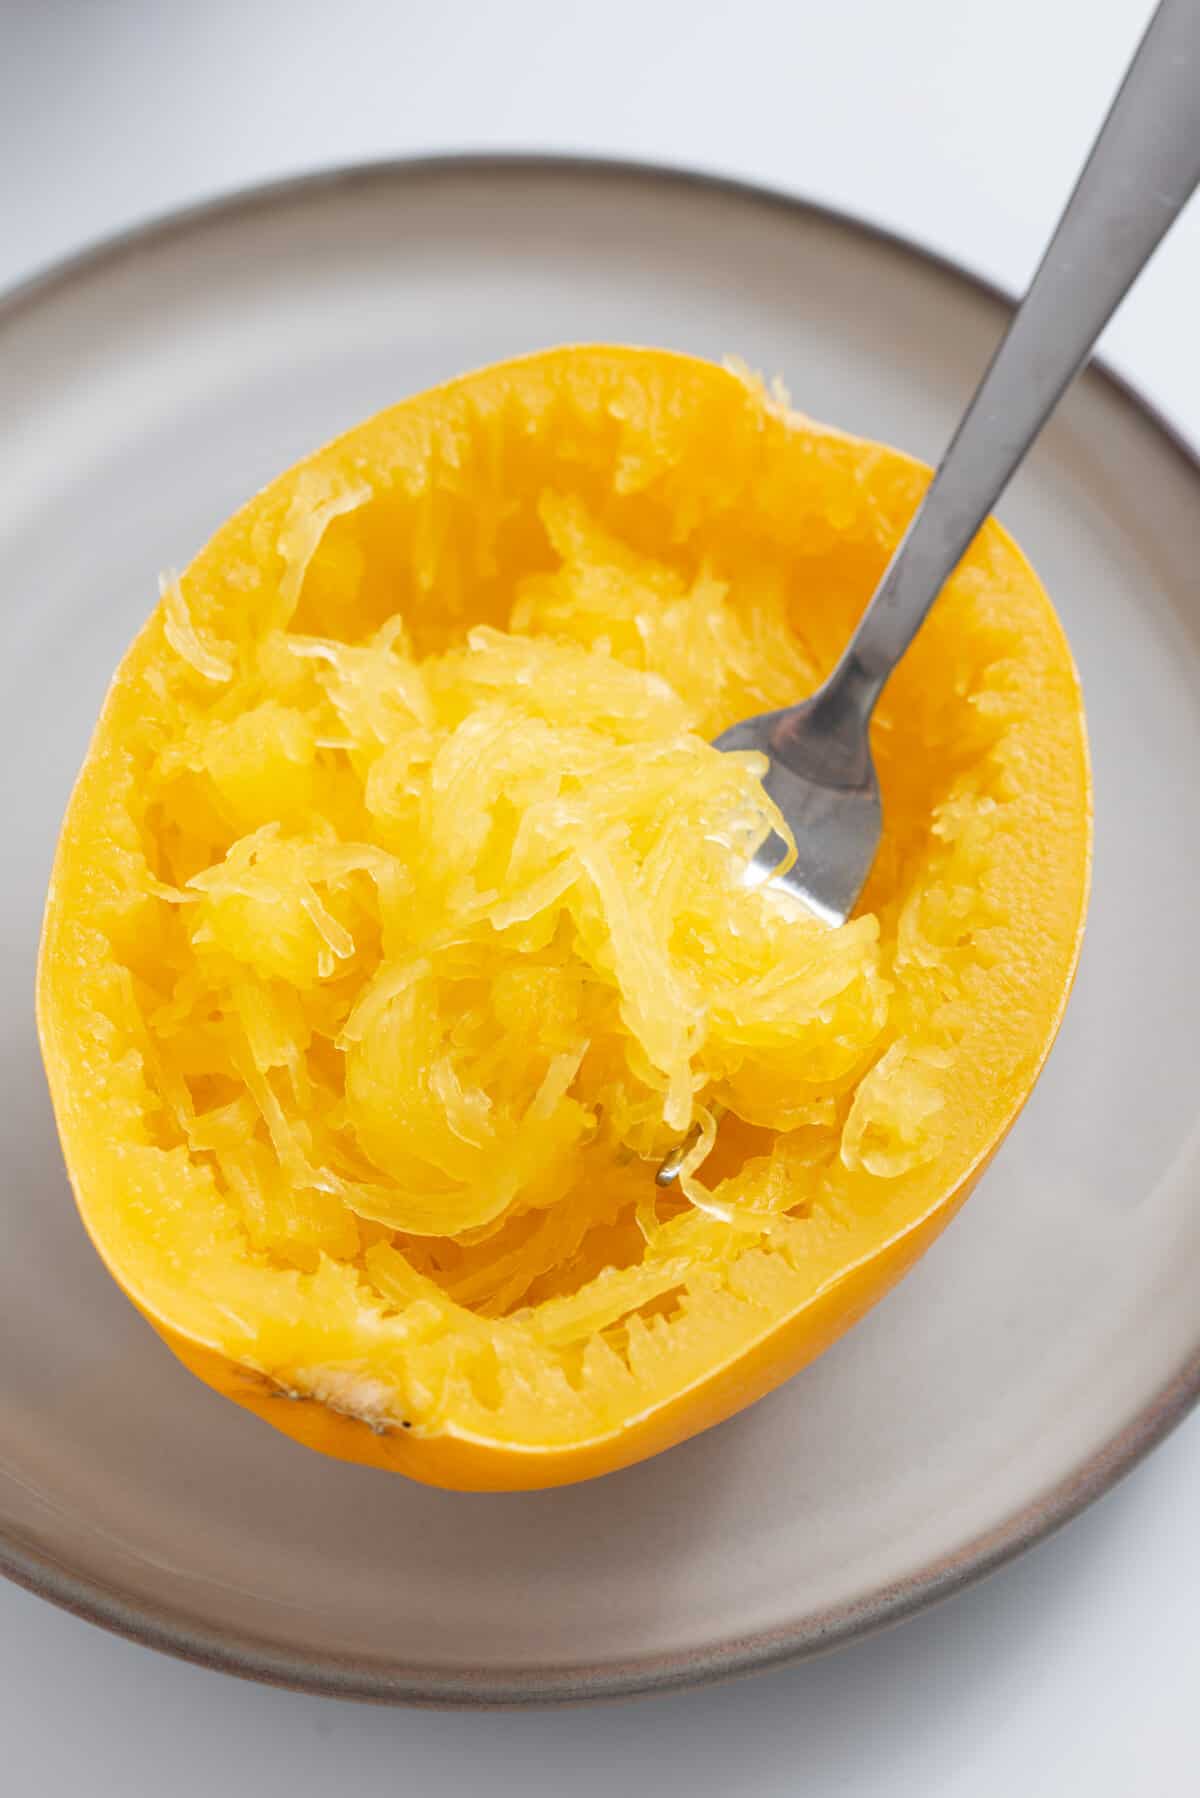 A close up image of cooked spaghetti squash with the strands scraped with a fork.